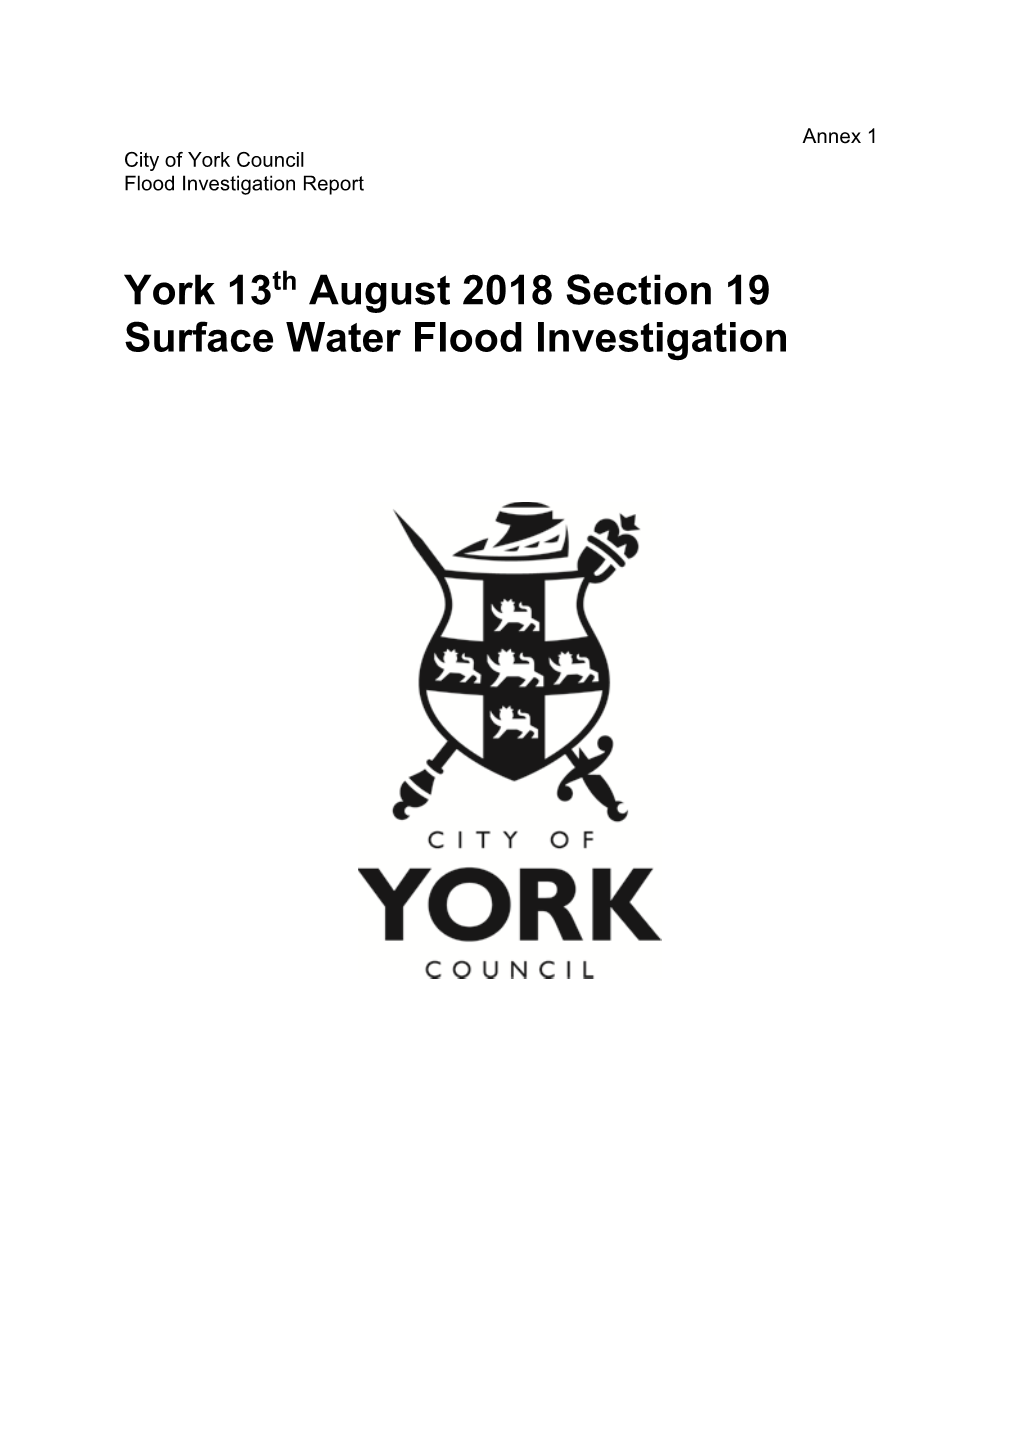 Annex 1 York 130818 Section 19 Surface Water Flood Investigation March19 , Item 44. PDF 1 MB